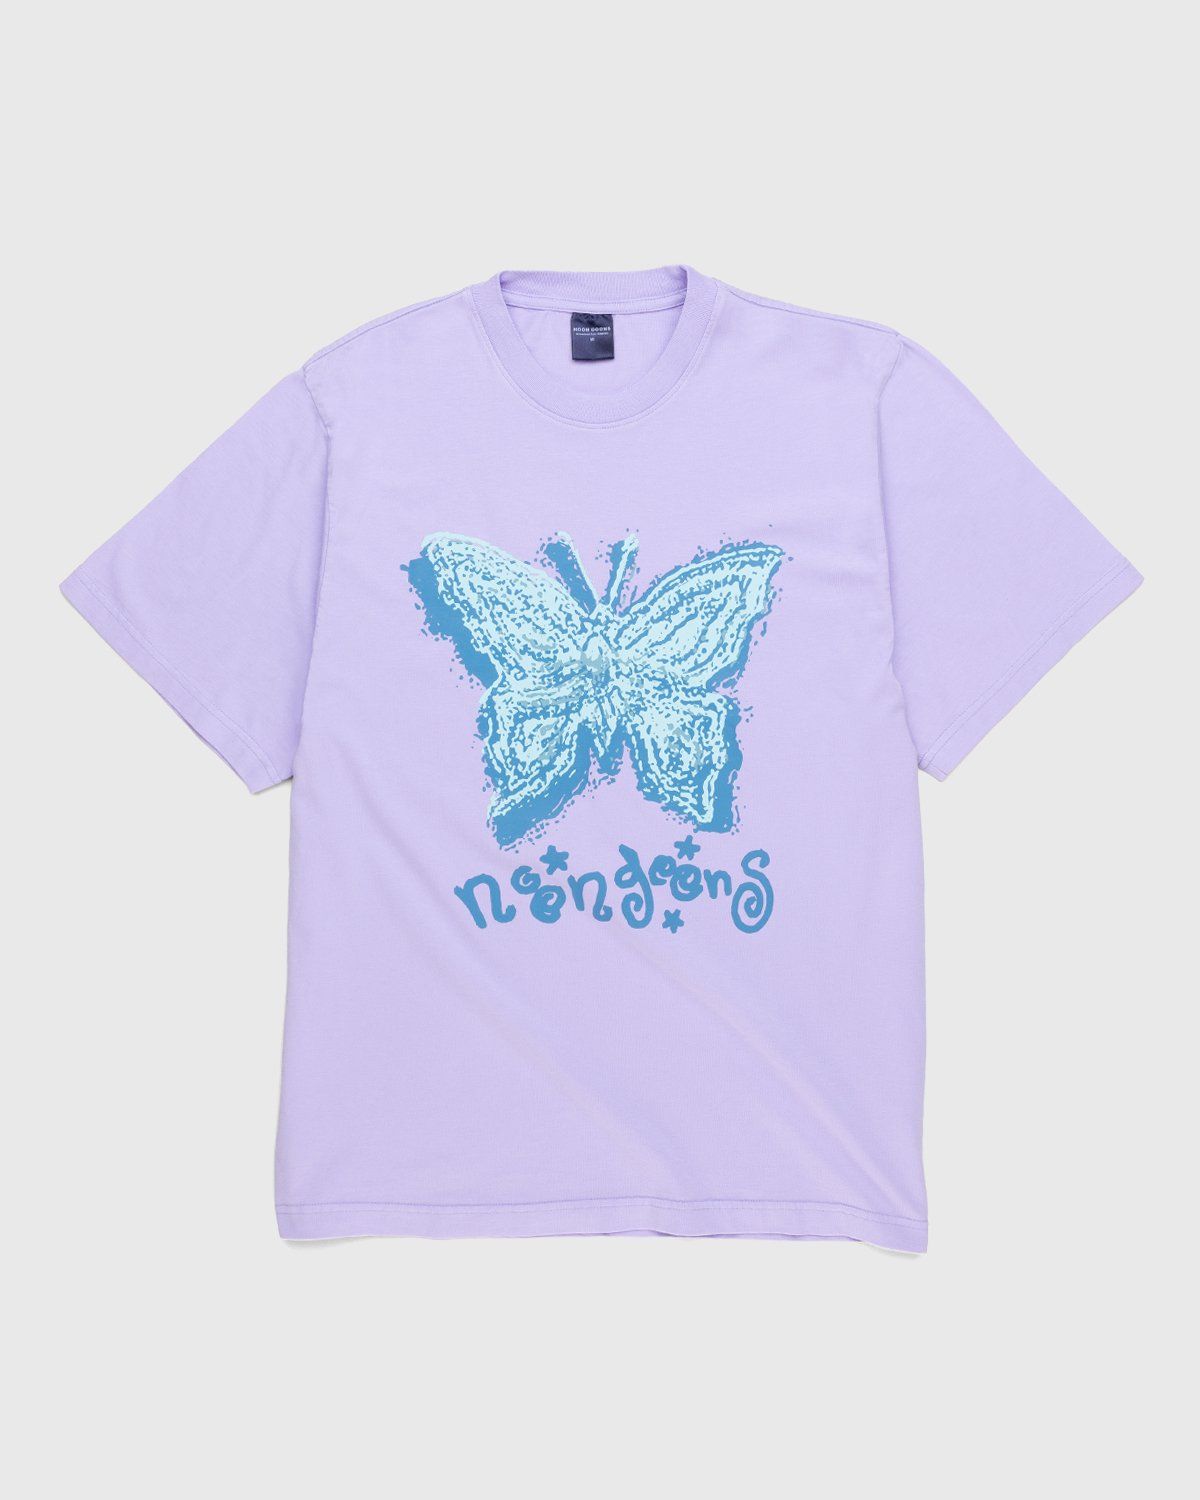 Noon Goons – Fly High T-Shirt Lavender - T-Shirts - Purple - Image 1